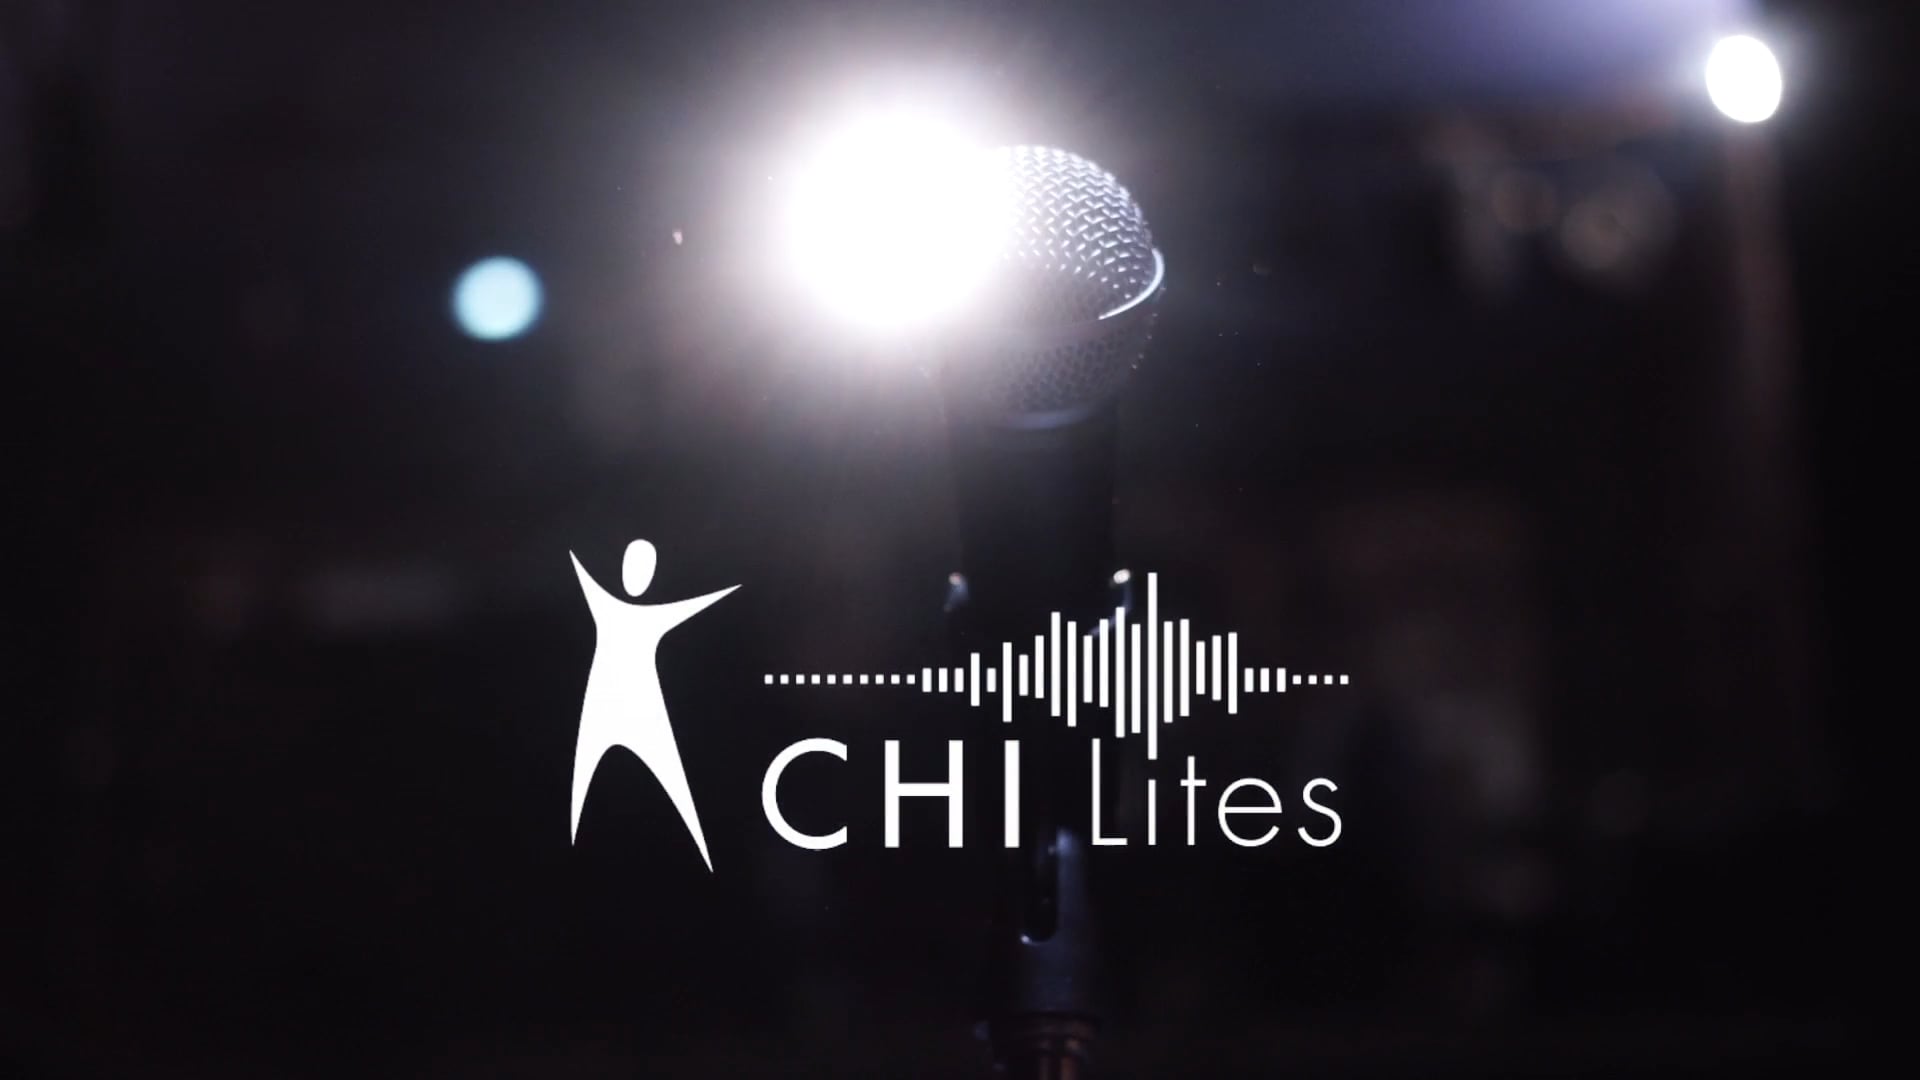 CHI Lites - Montreal Tech Conference - CocoFilms.ca